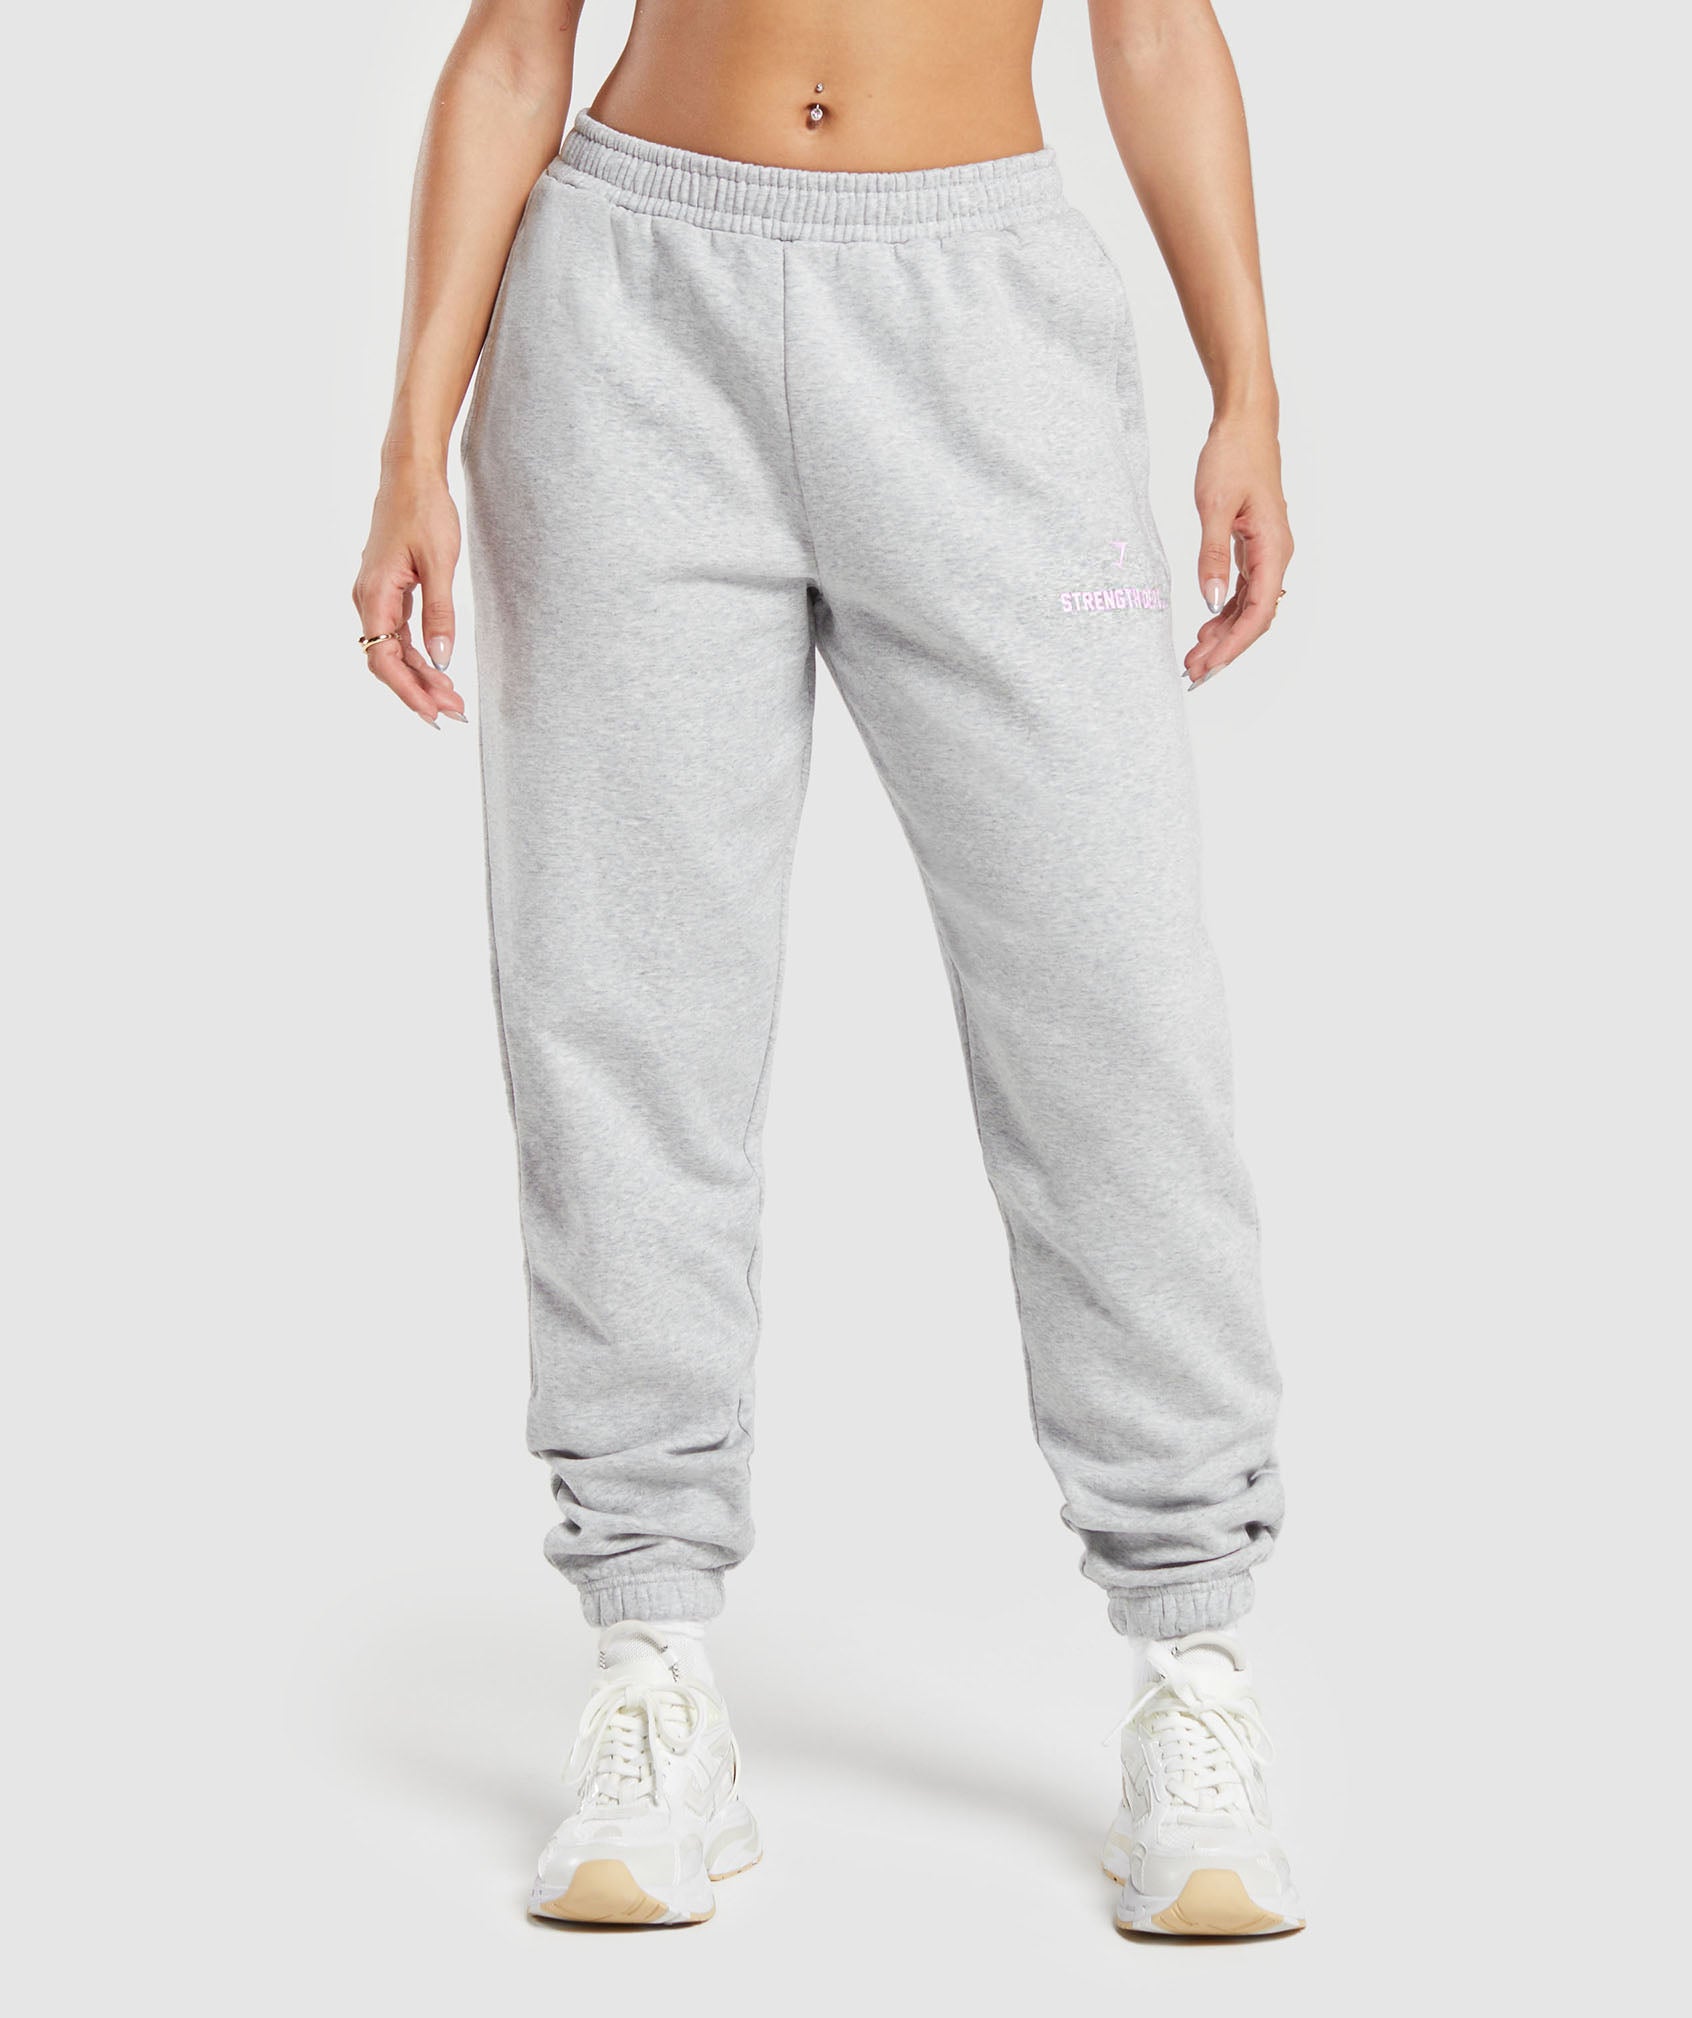 Strength Department Graphic Joggers in Light Grey Core Marl